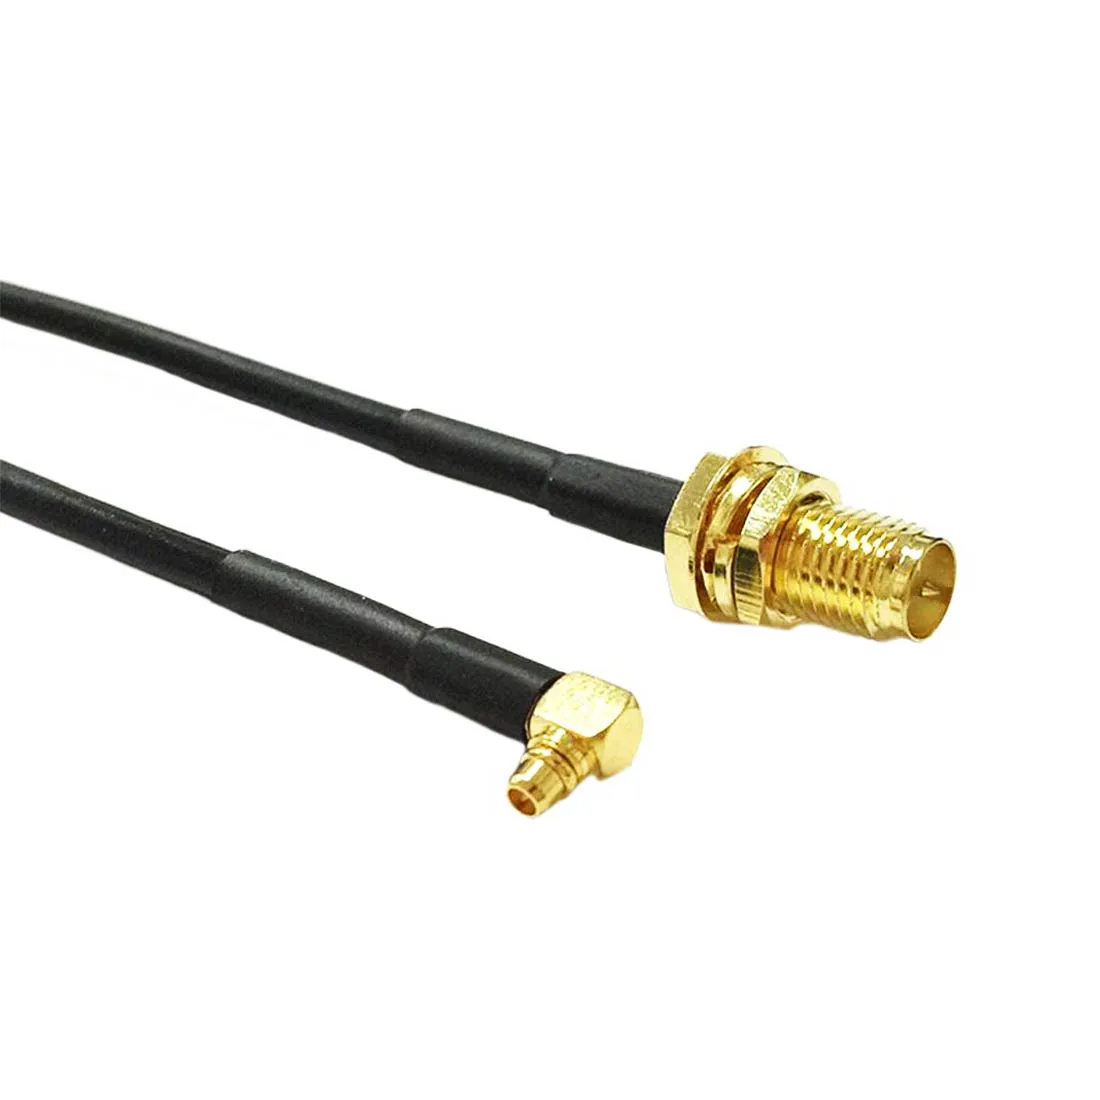 New Modem Coaxial Cable RP-SMA Female Jack Nut Switch MMCX Male Plug Right Angle Connector RG174 Cable 15cm 6inch Adapter